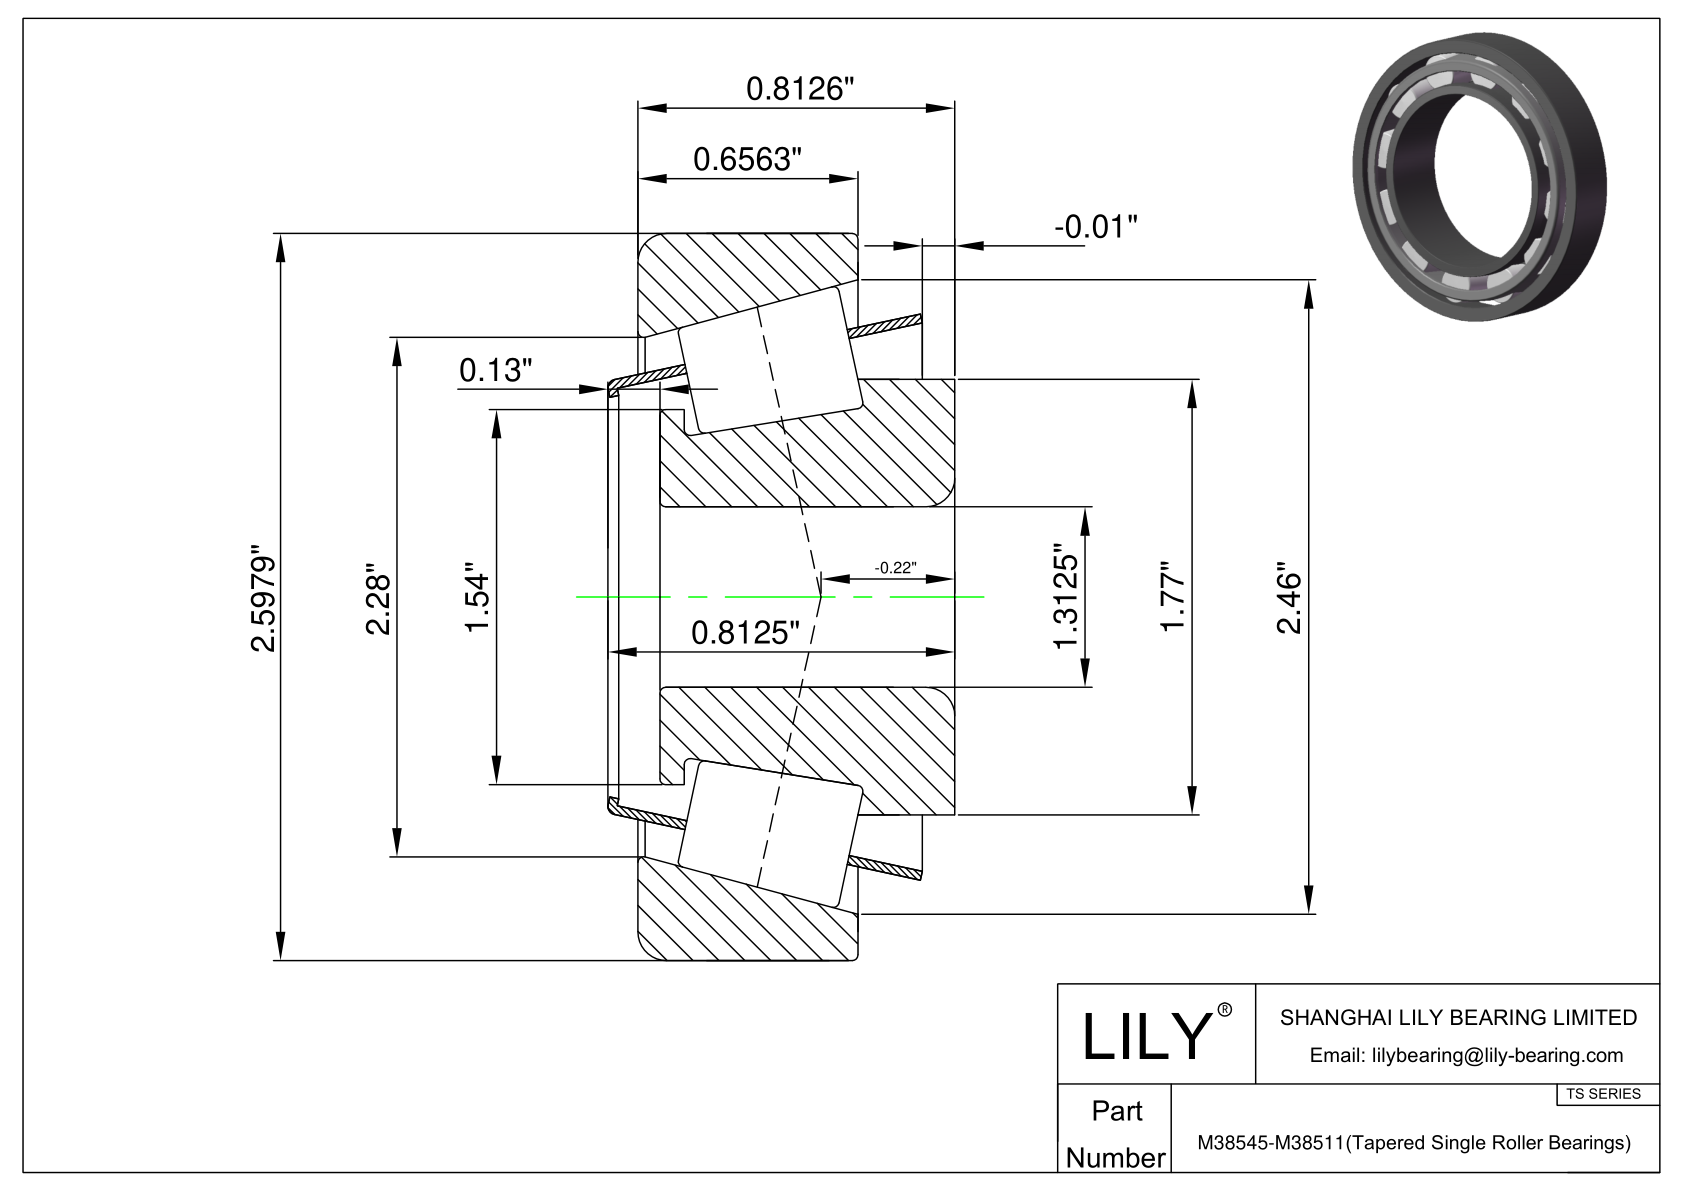 M38545-M38511 TS (Tapered Single Roller Bearings) (Imperial) cad drawing